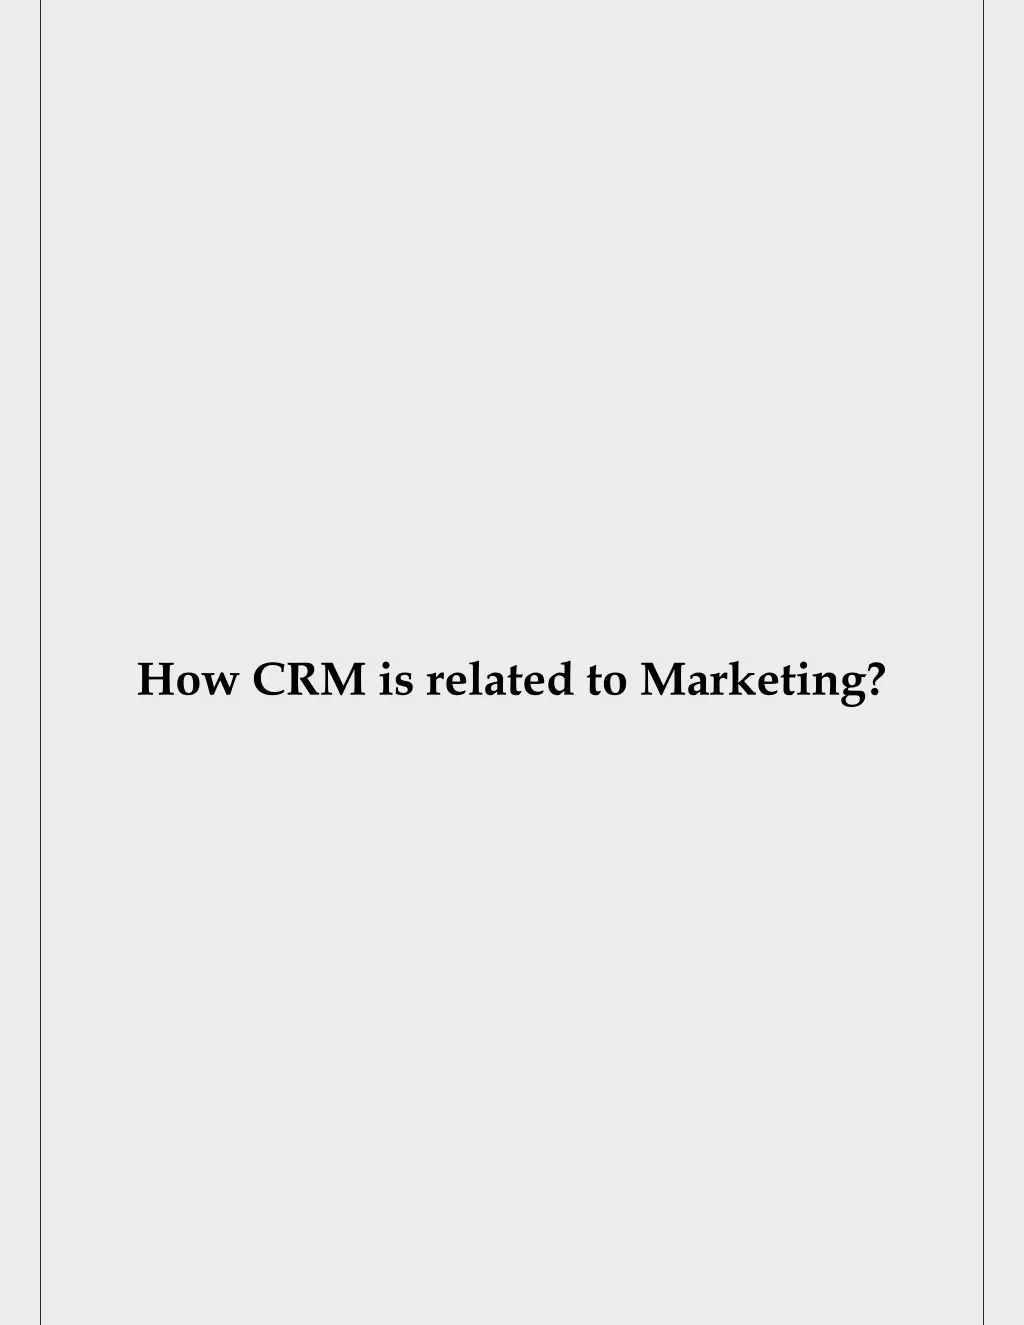 how crm is related to marketing